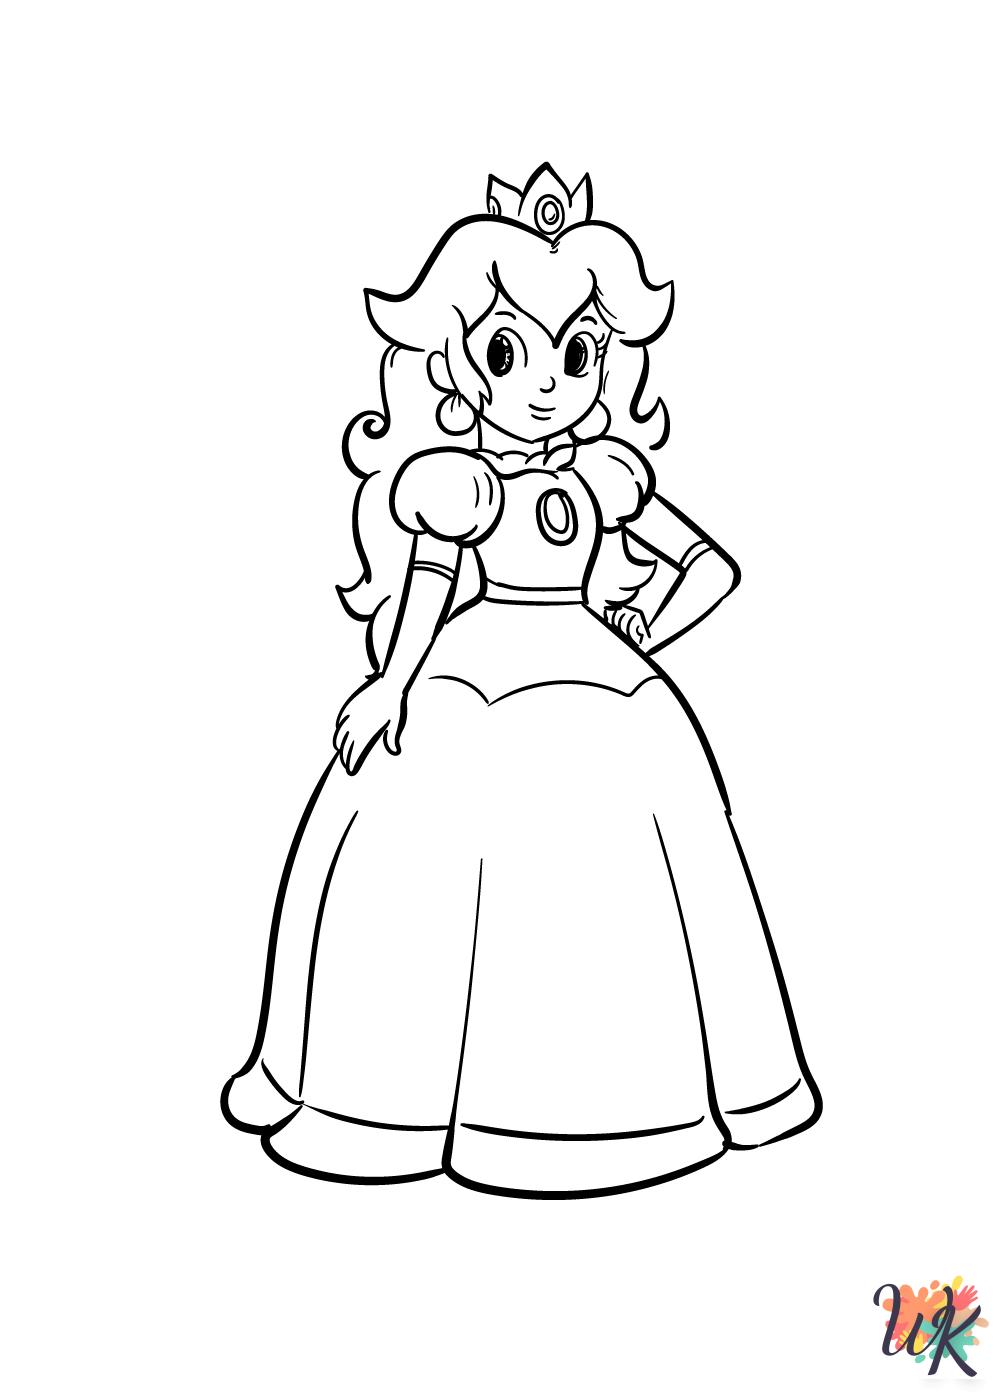 detailed Princess Peach coloring pages for adults